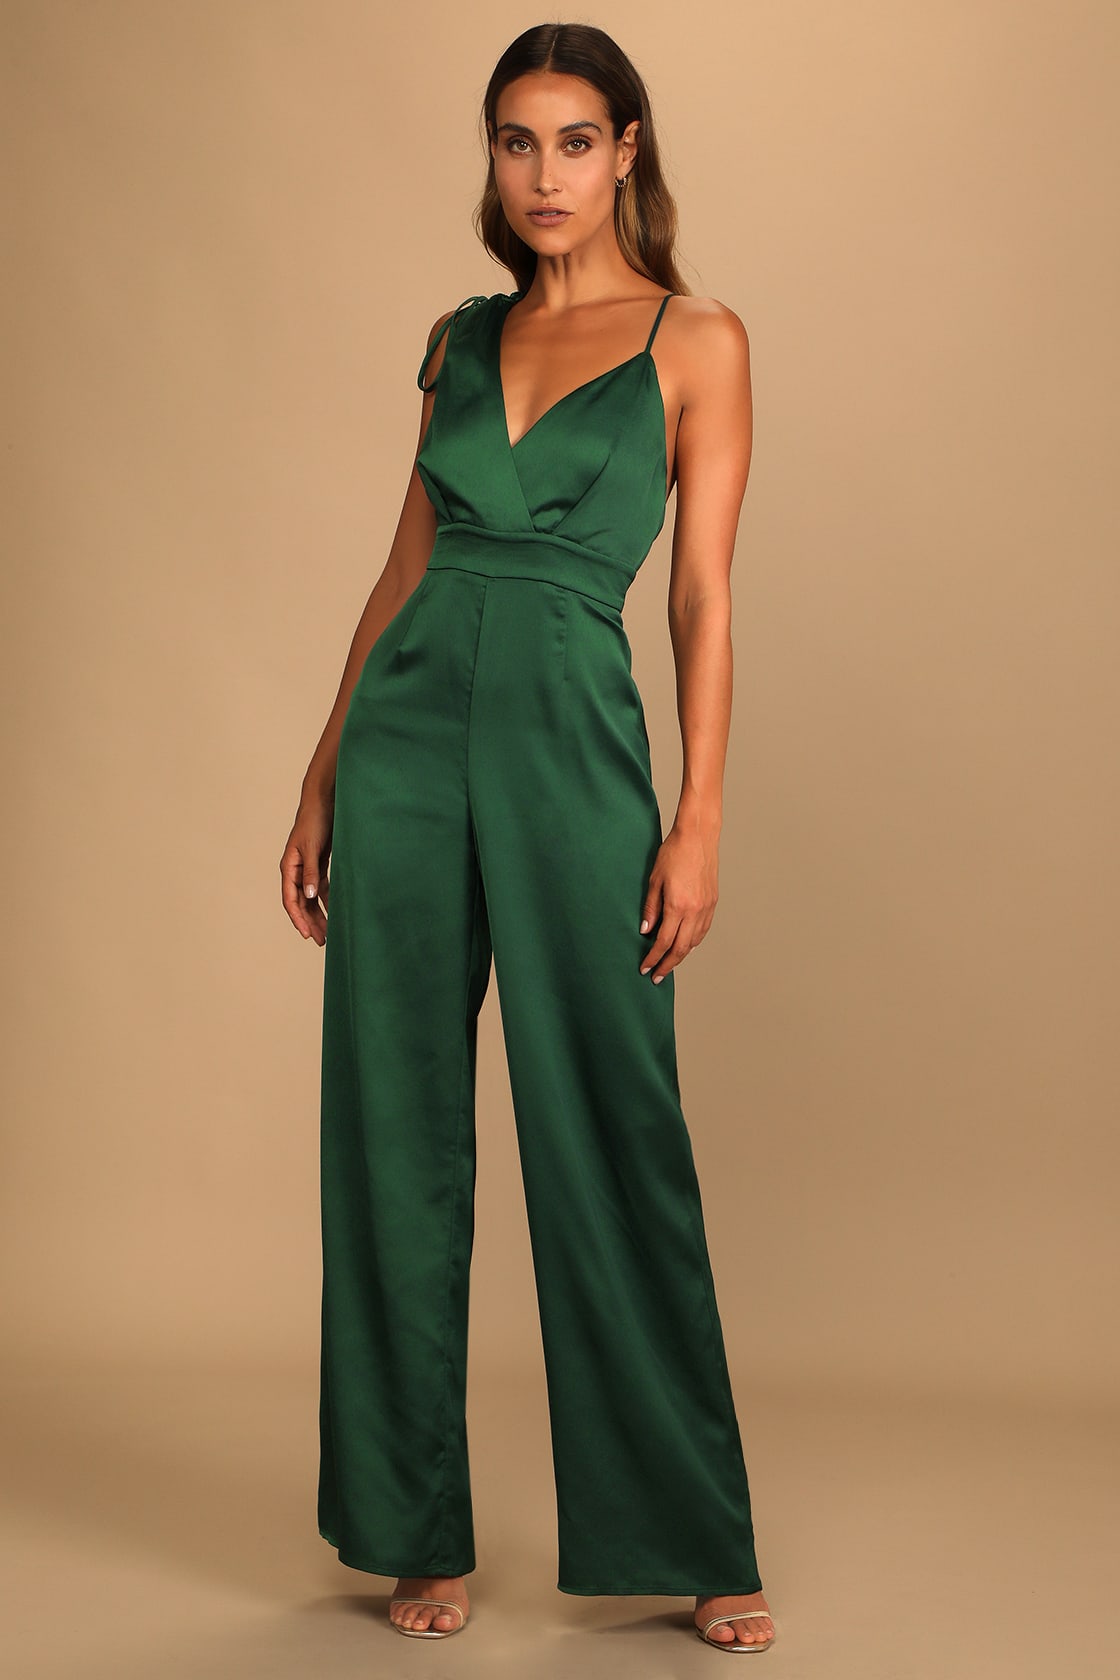 Green Jumpsuit for 40th Birthday Party Dinner Outfit